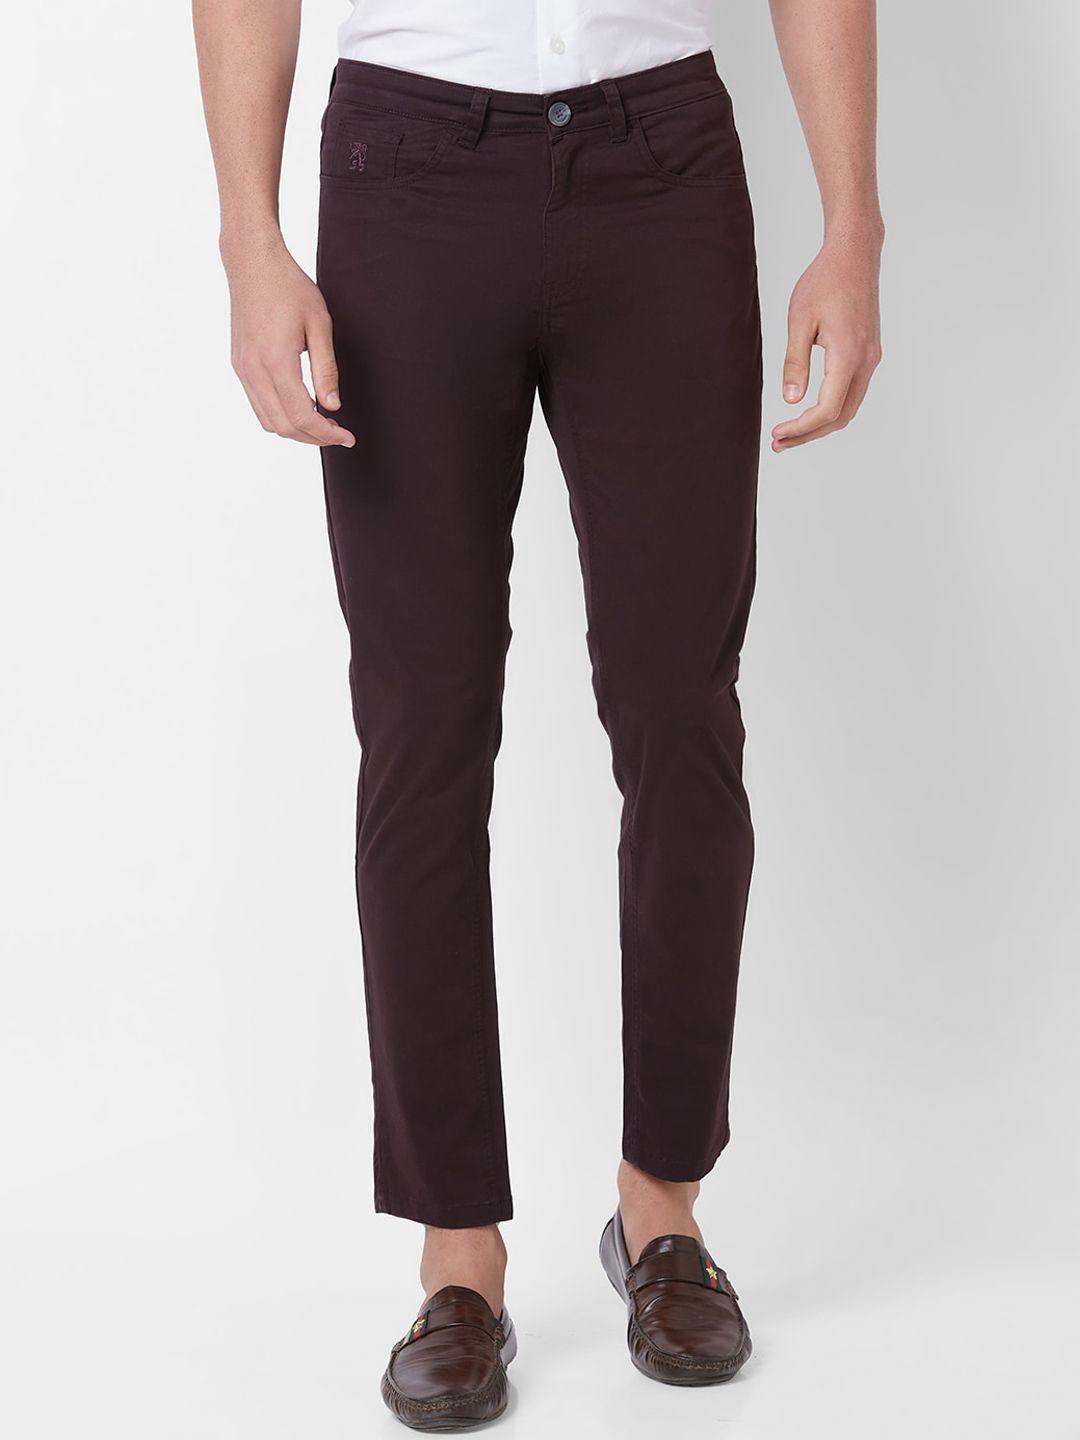 giordano-men-slim-fit-mid-rise-chinos-trousers